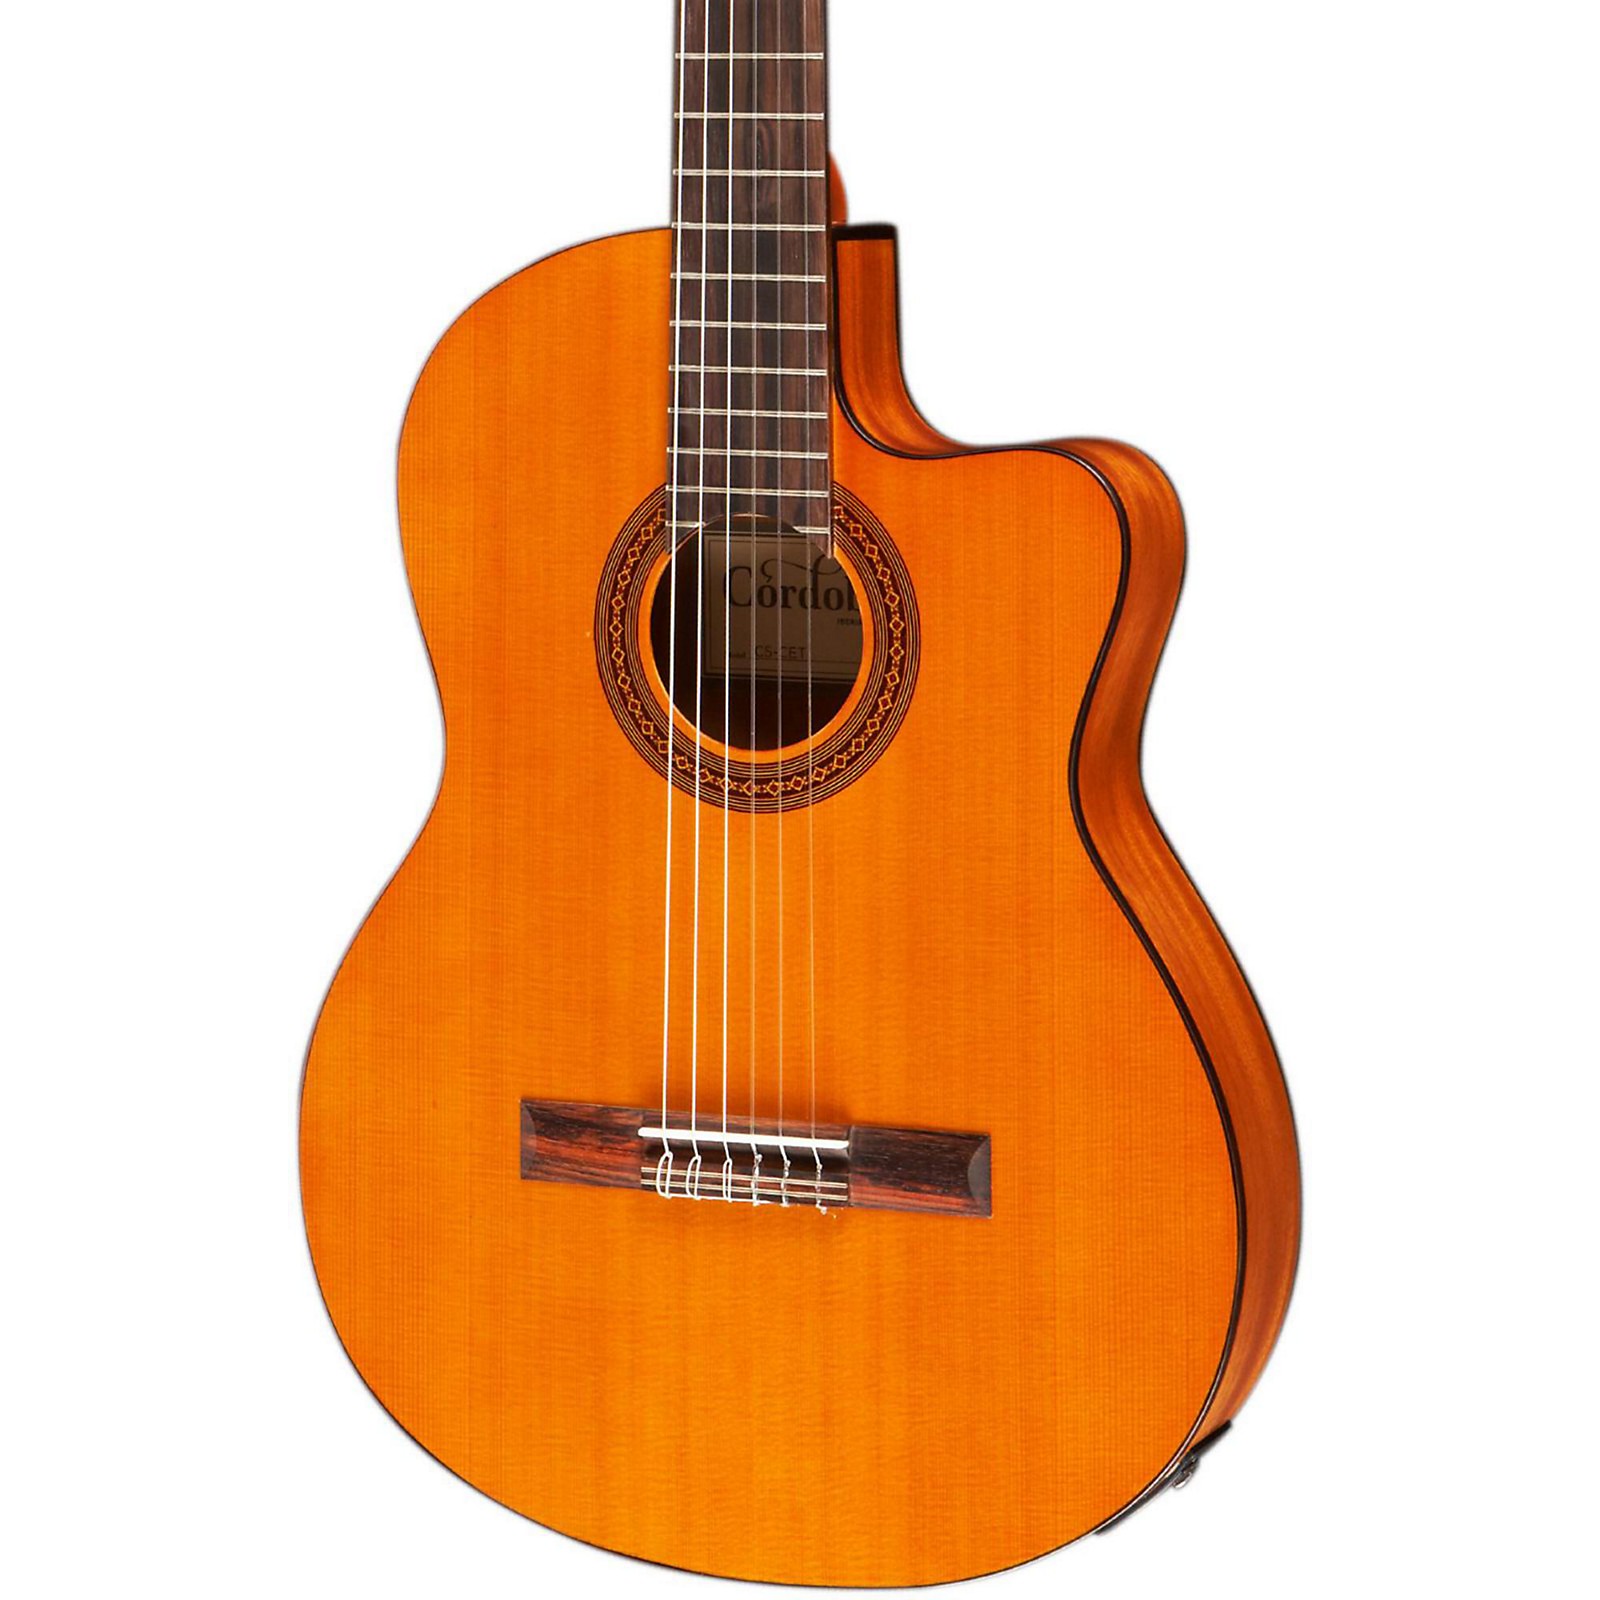 https://media.musicarts.com/is/image/MMGS7/C5-CET-Classical-Thinline-Acoustic-Electric-Guitar-Natural/H84509000002000-00-1600x1600.jpg